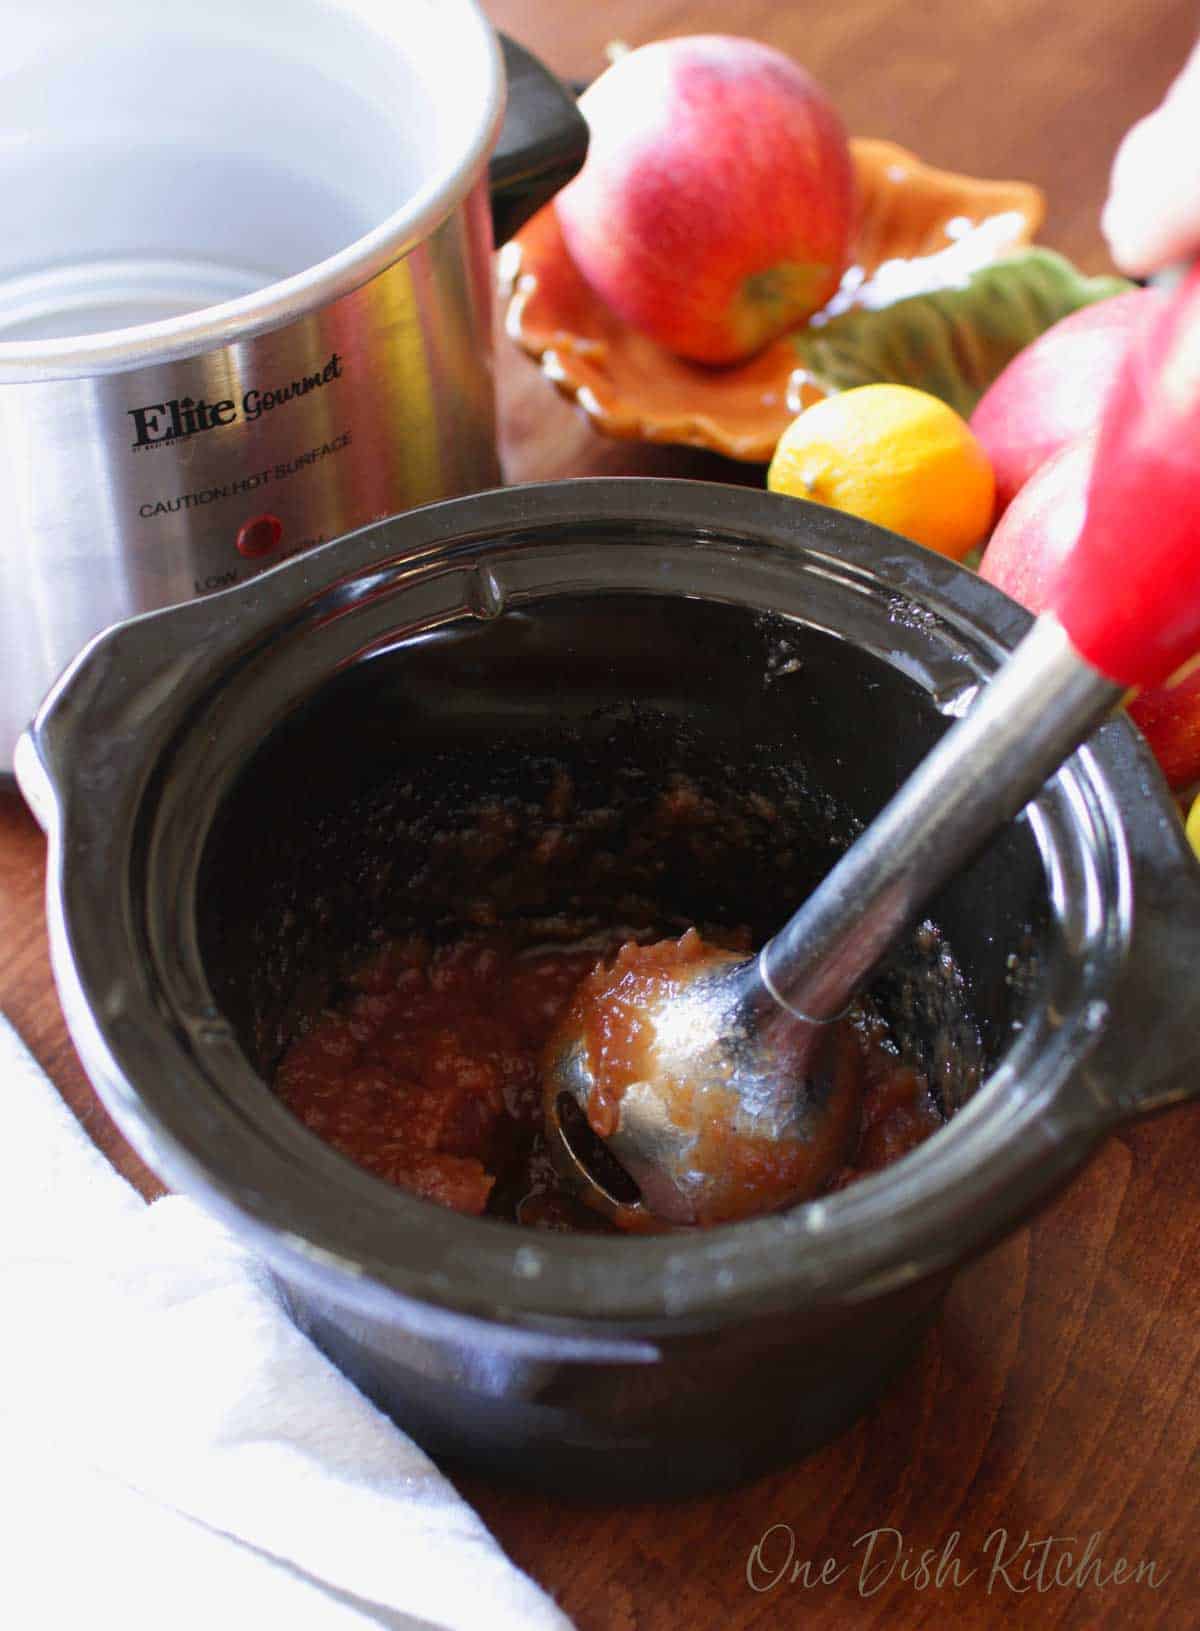 using an immersion blender to puree apple butter.